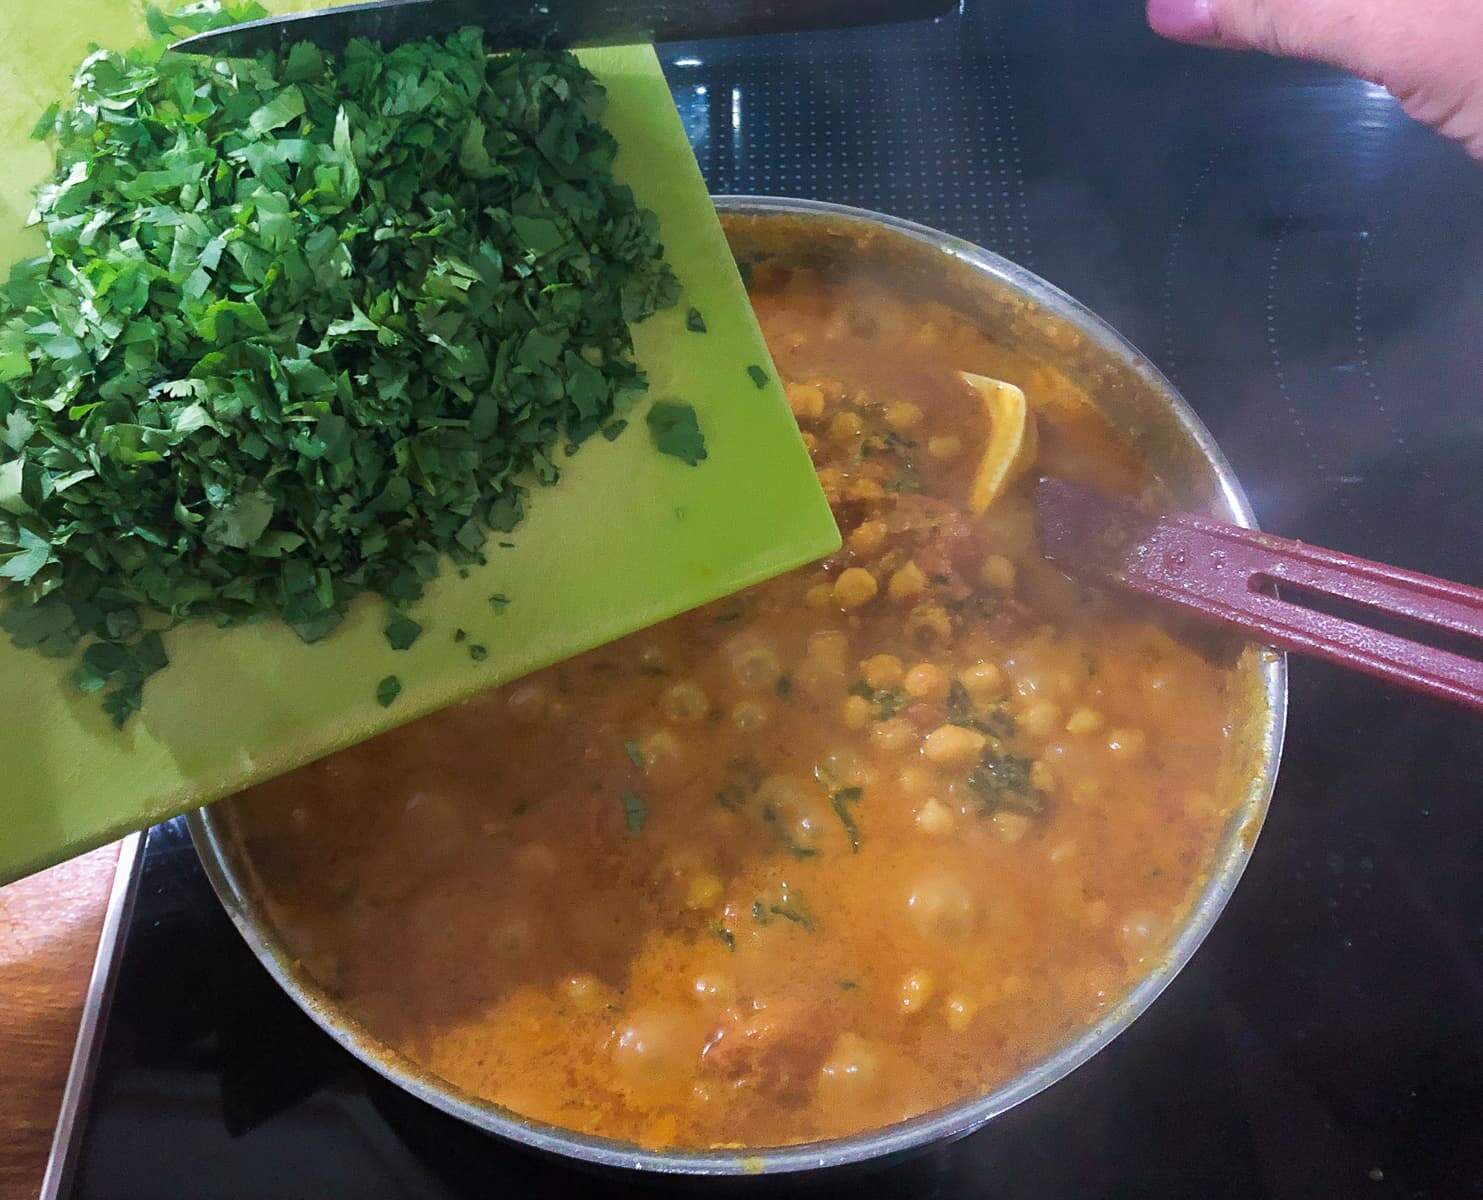 Fresh chopped herbs being added to a pan of simmering curry.